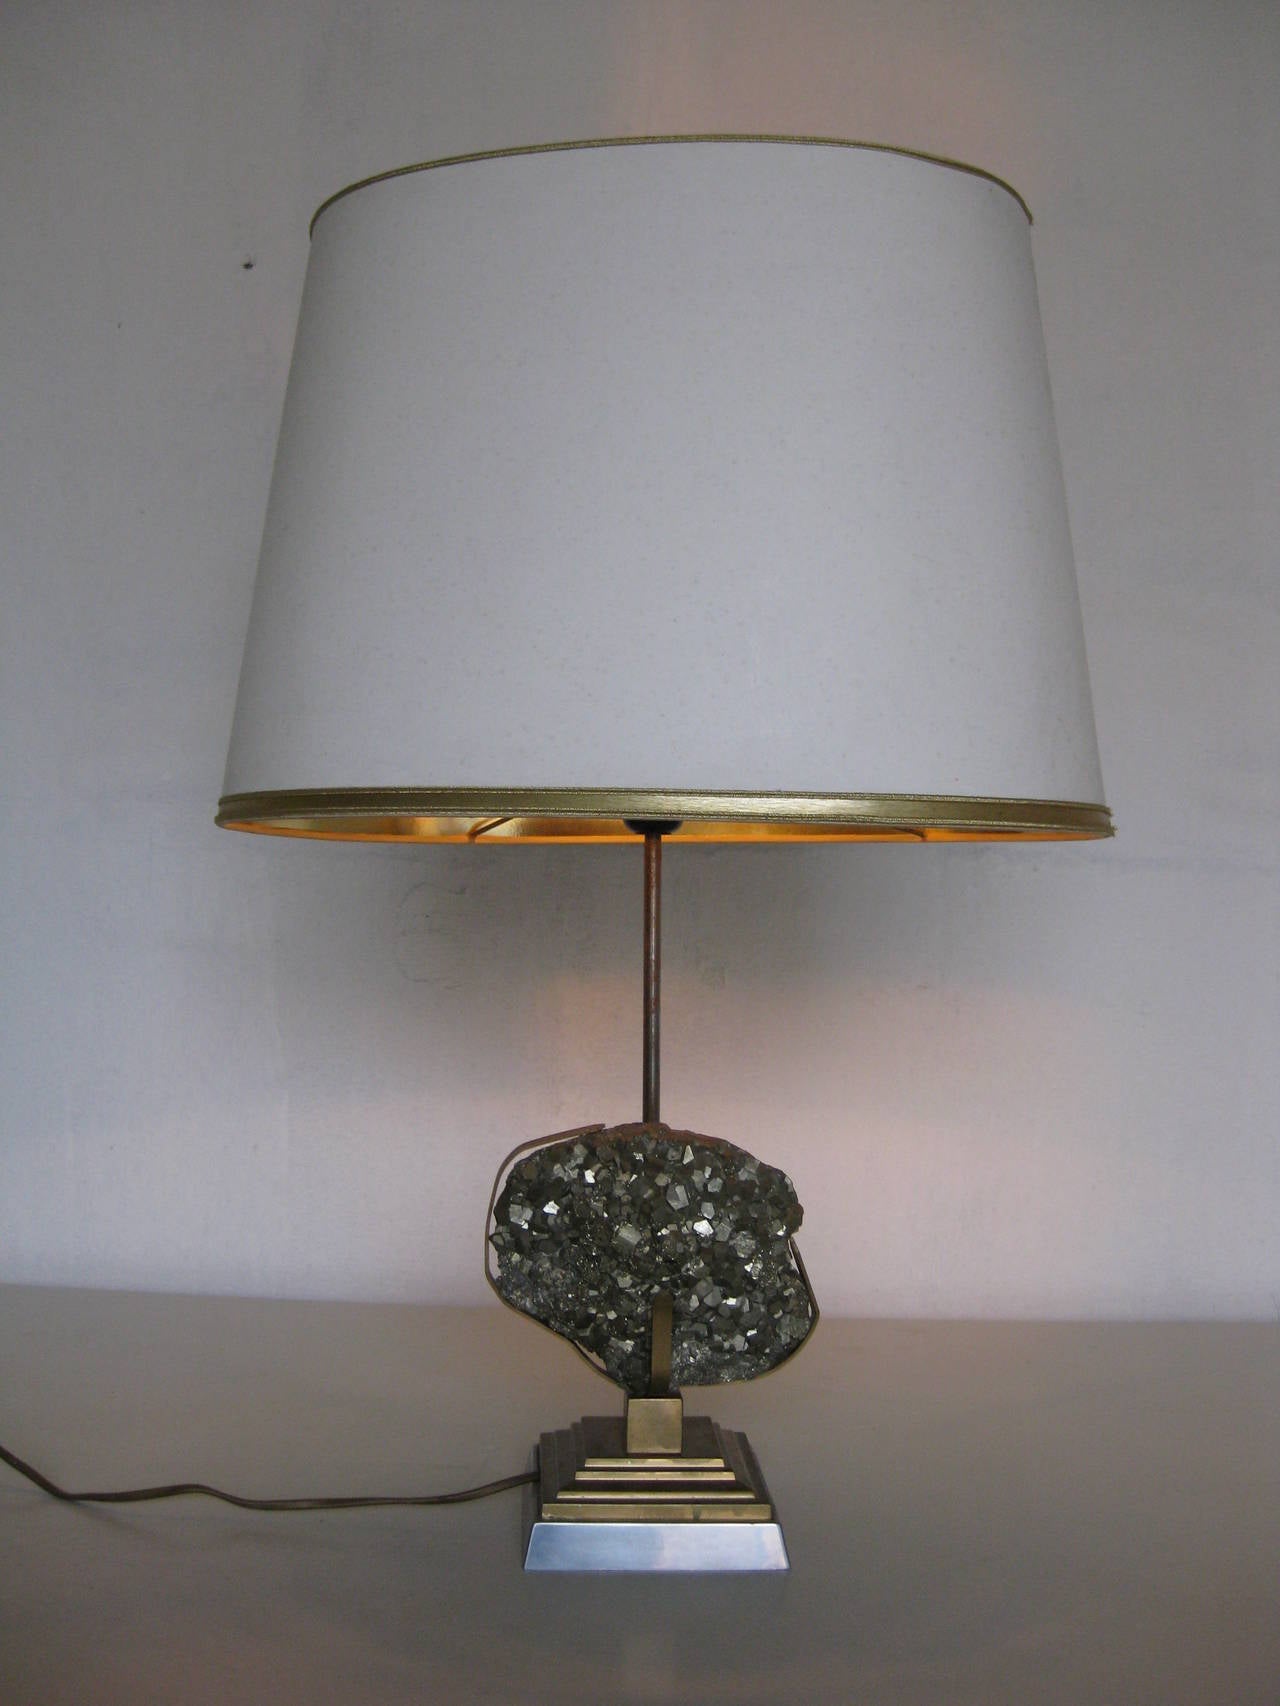 Willy Daro designed table lamp.
It stands on a copper foot stone inlaid.
The hood is made of like a paper cardboard material but solid.
Very good condition: there is a stain on the hood see photo. However you can turn this side to the wall and